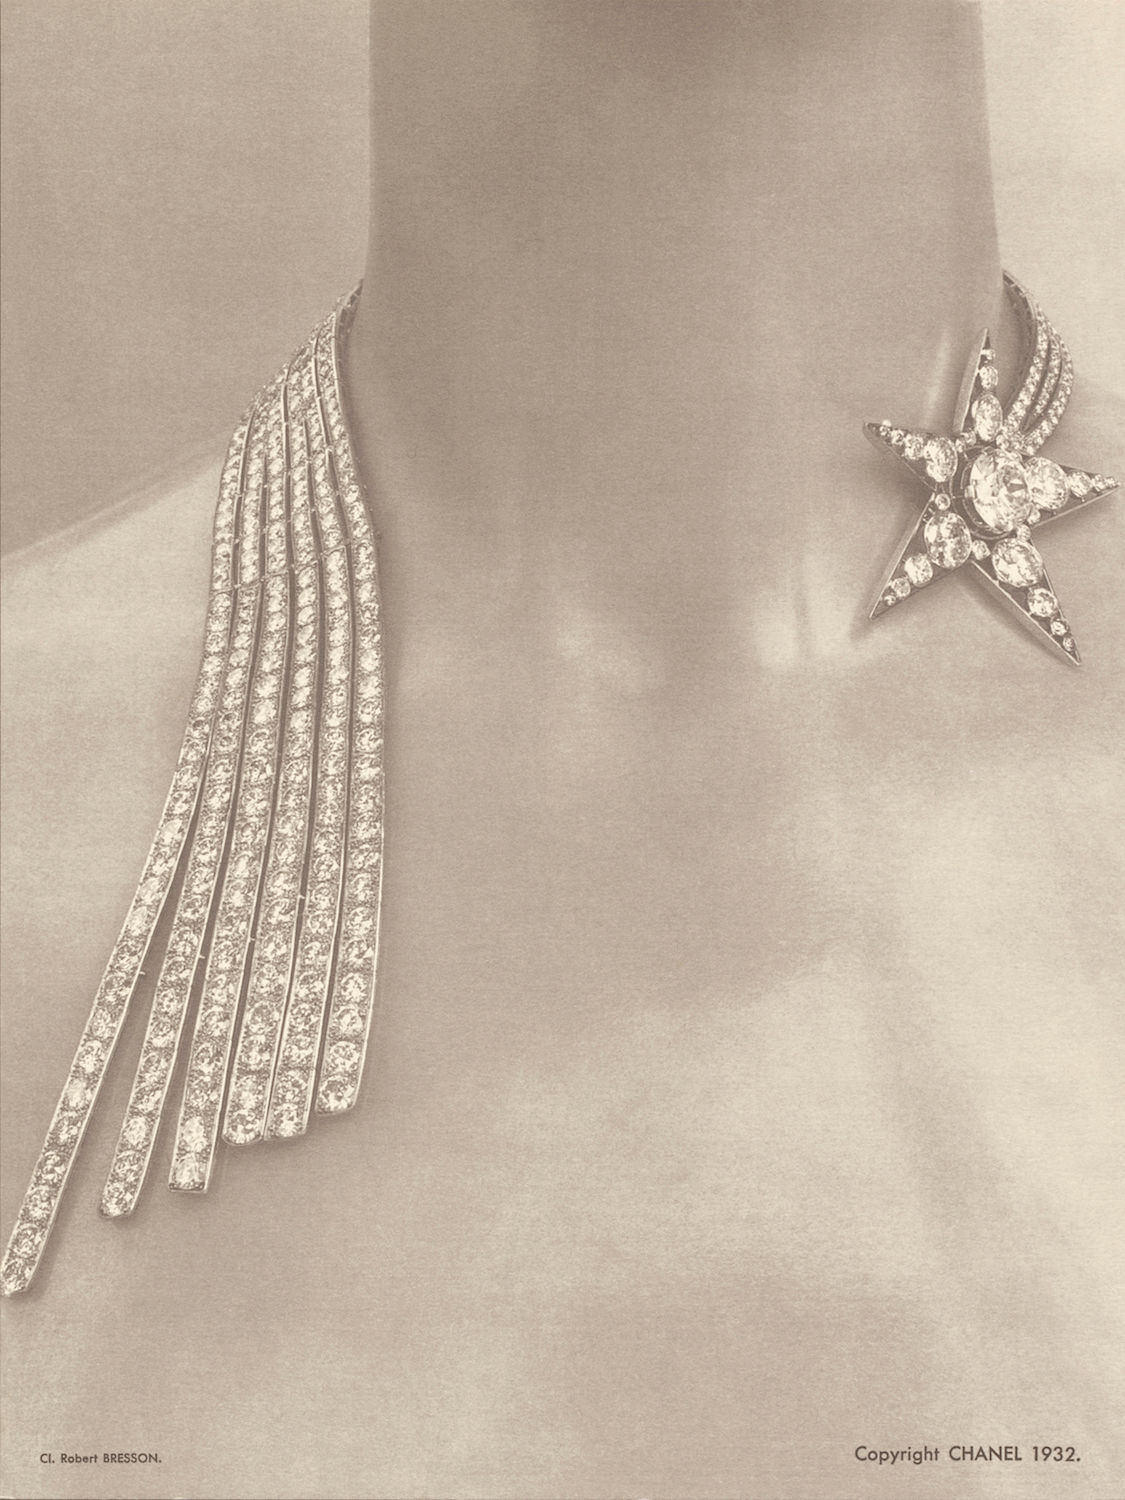 Chanel high jewellery collection 1932